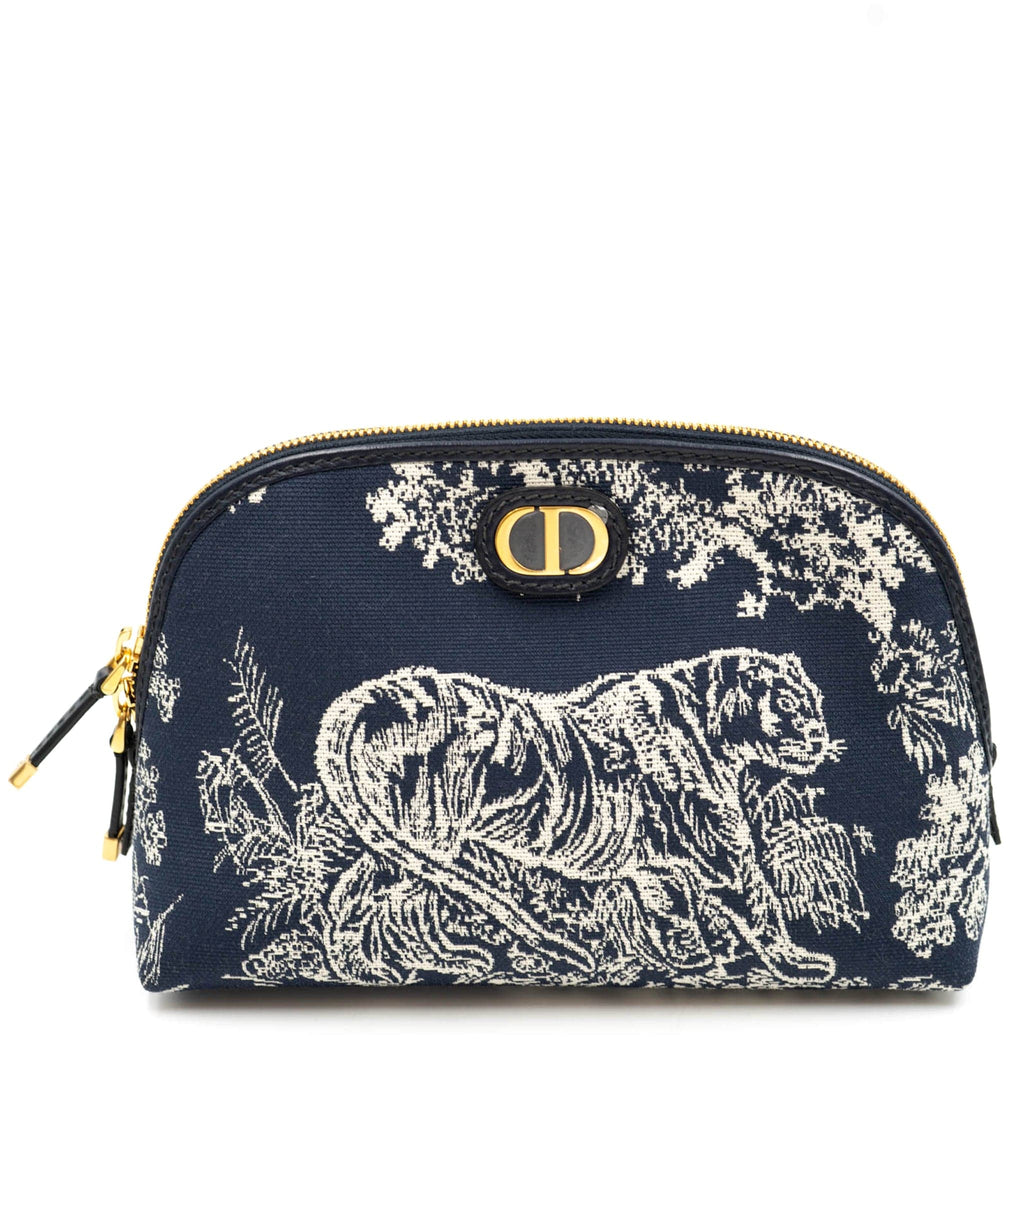 Dior BEAUTY JACQUARD TOILE DE JOUY COSMETIC POUCH - AWL3944